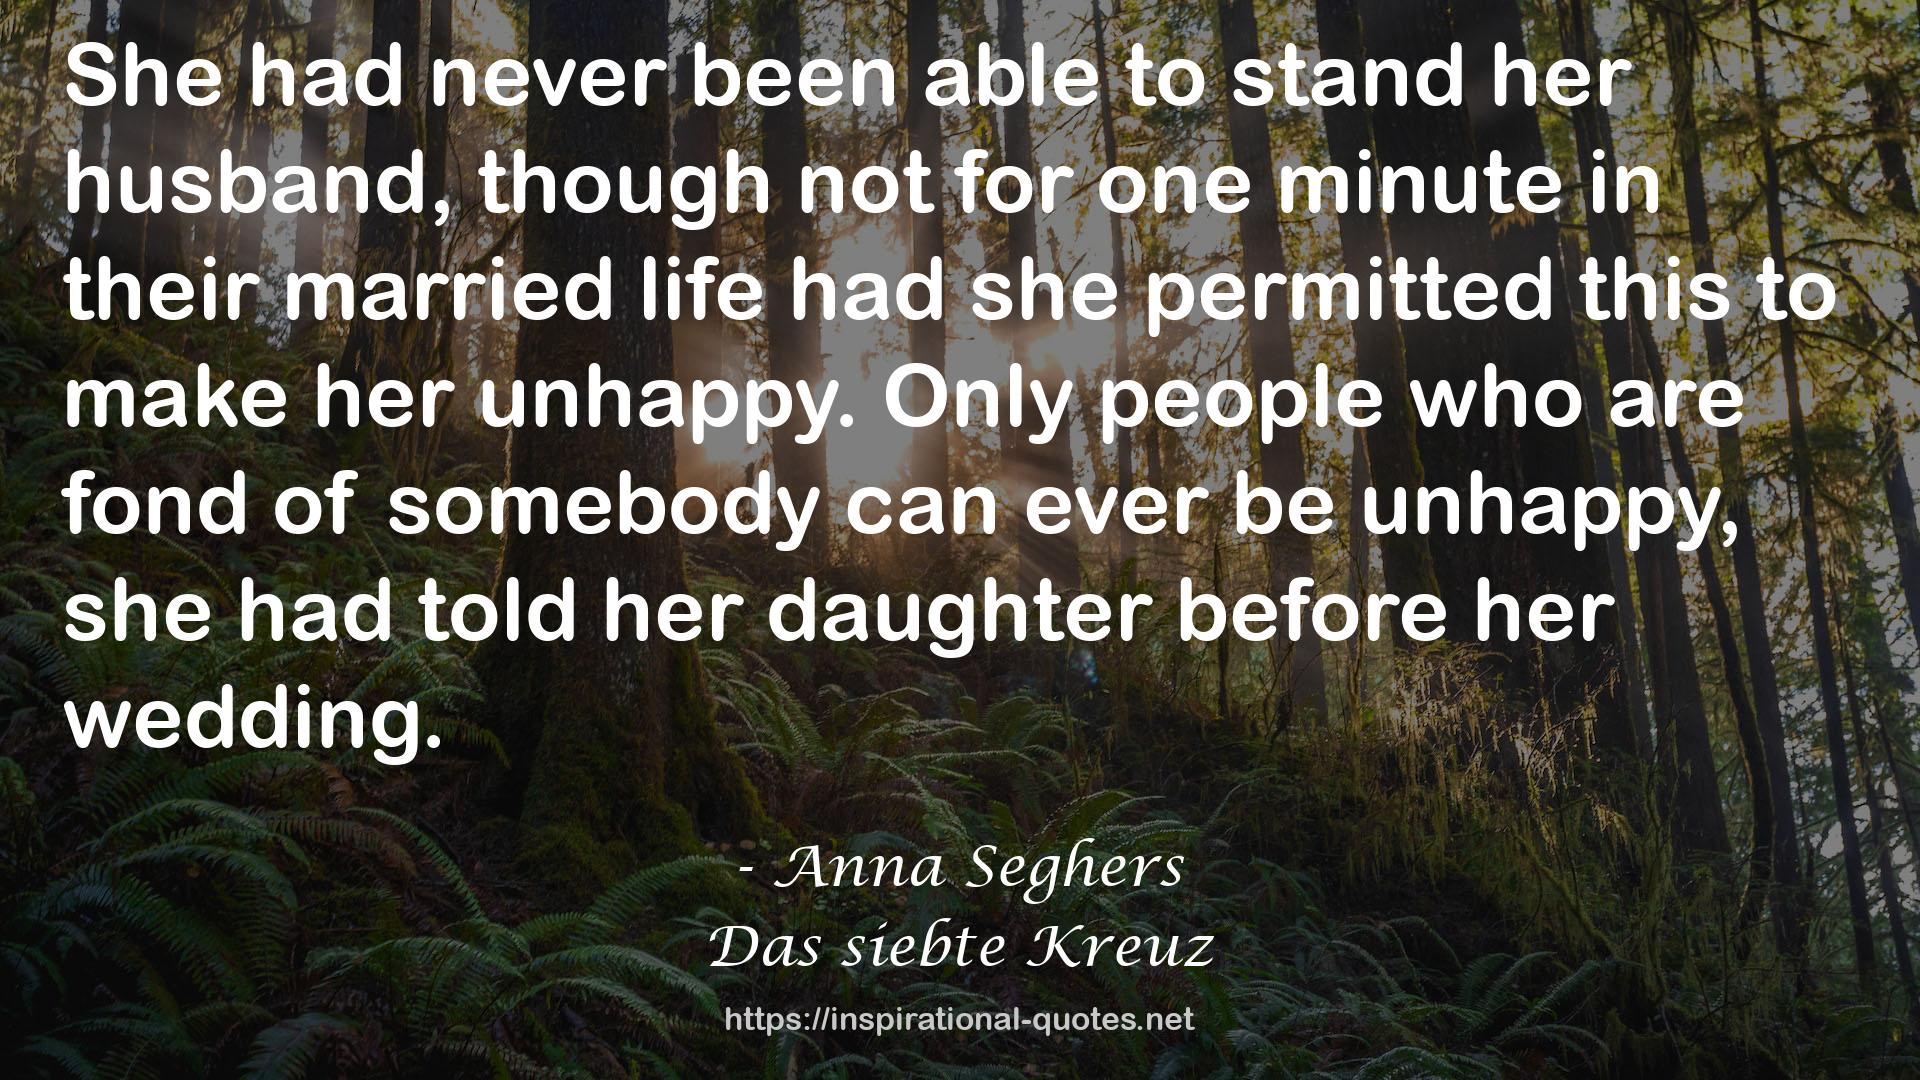 Anna Seghers QUOTES